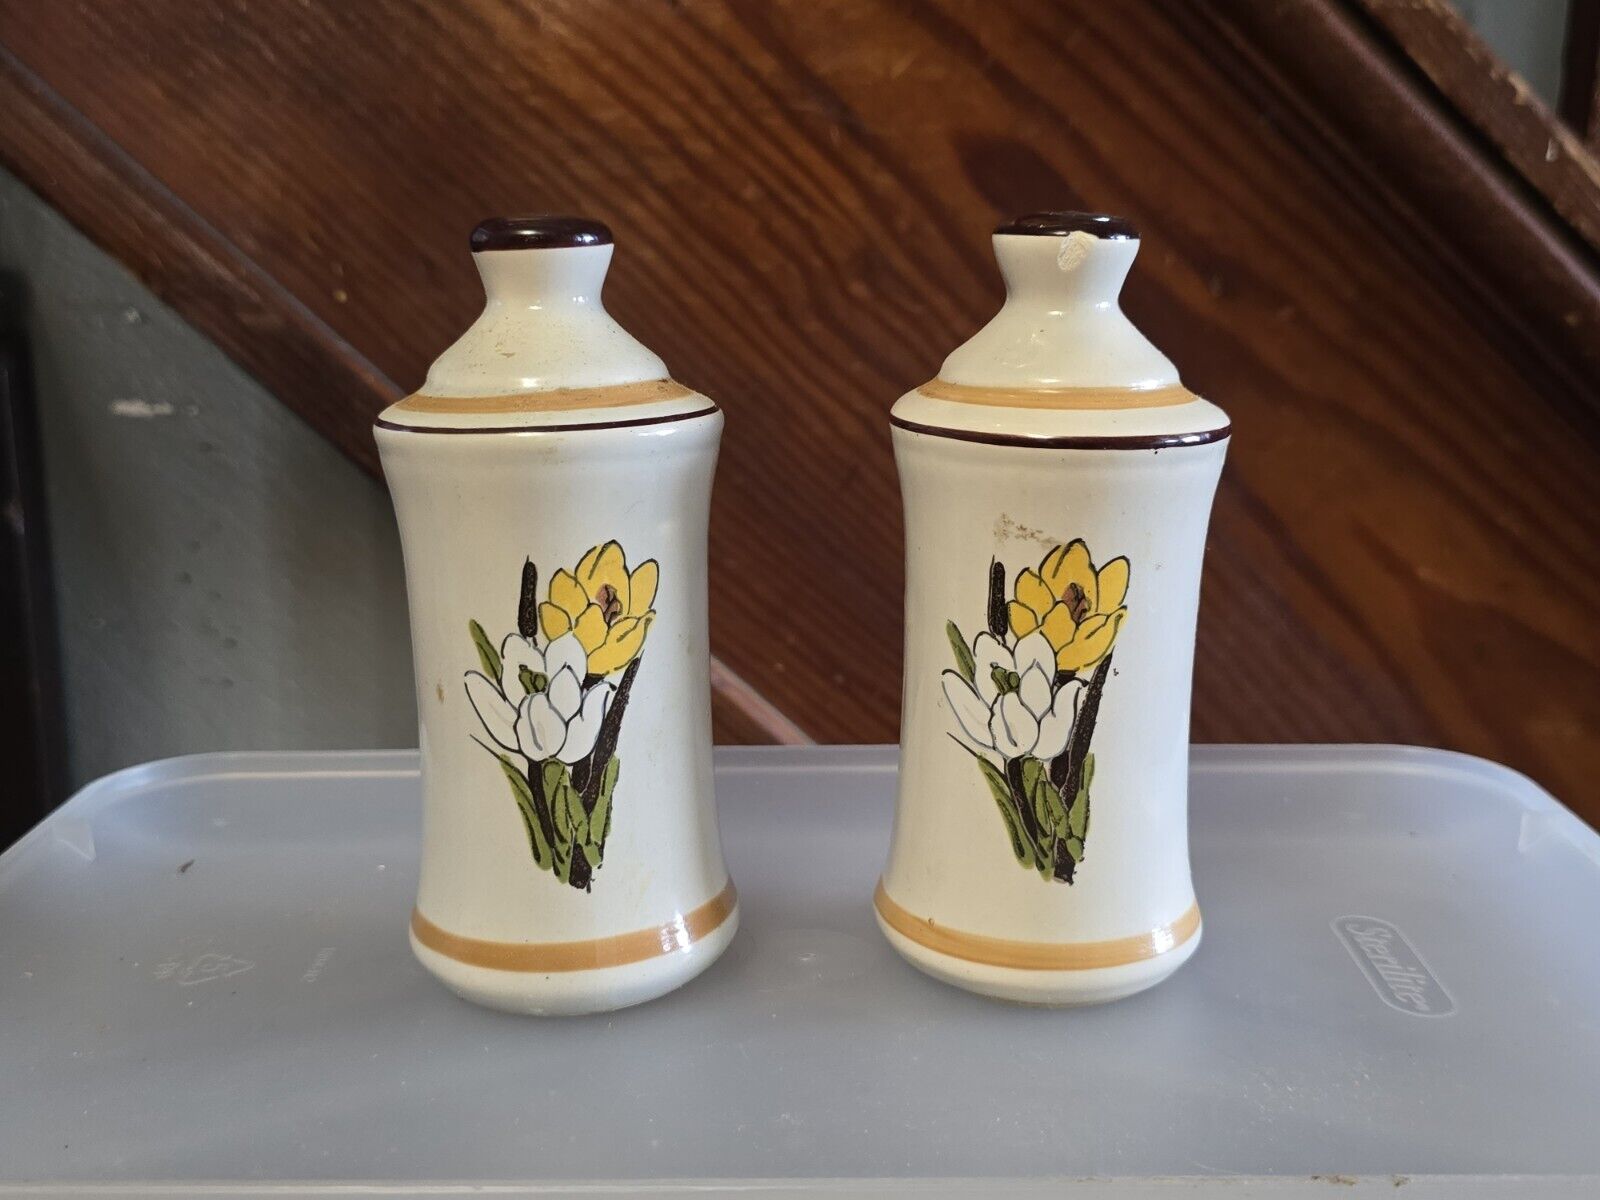 VINTAGE CALIFORNIA POTTERY USA CROCUS Salt and pepper shakers floral